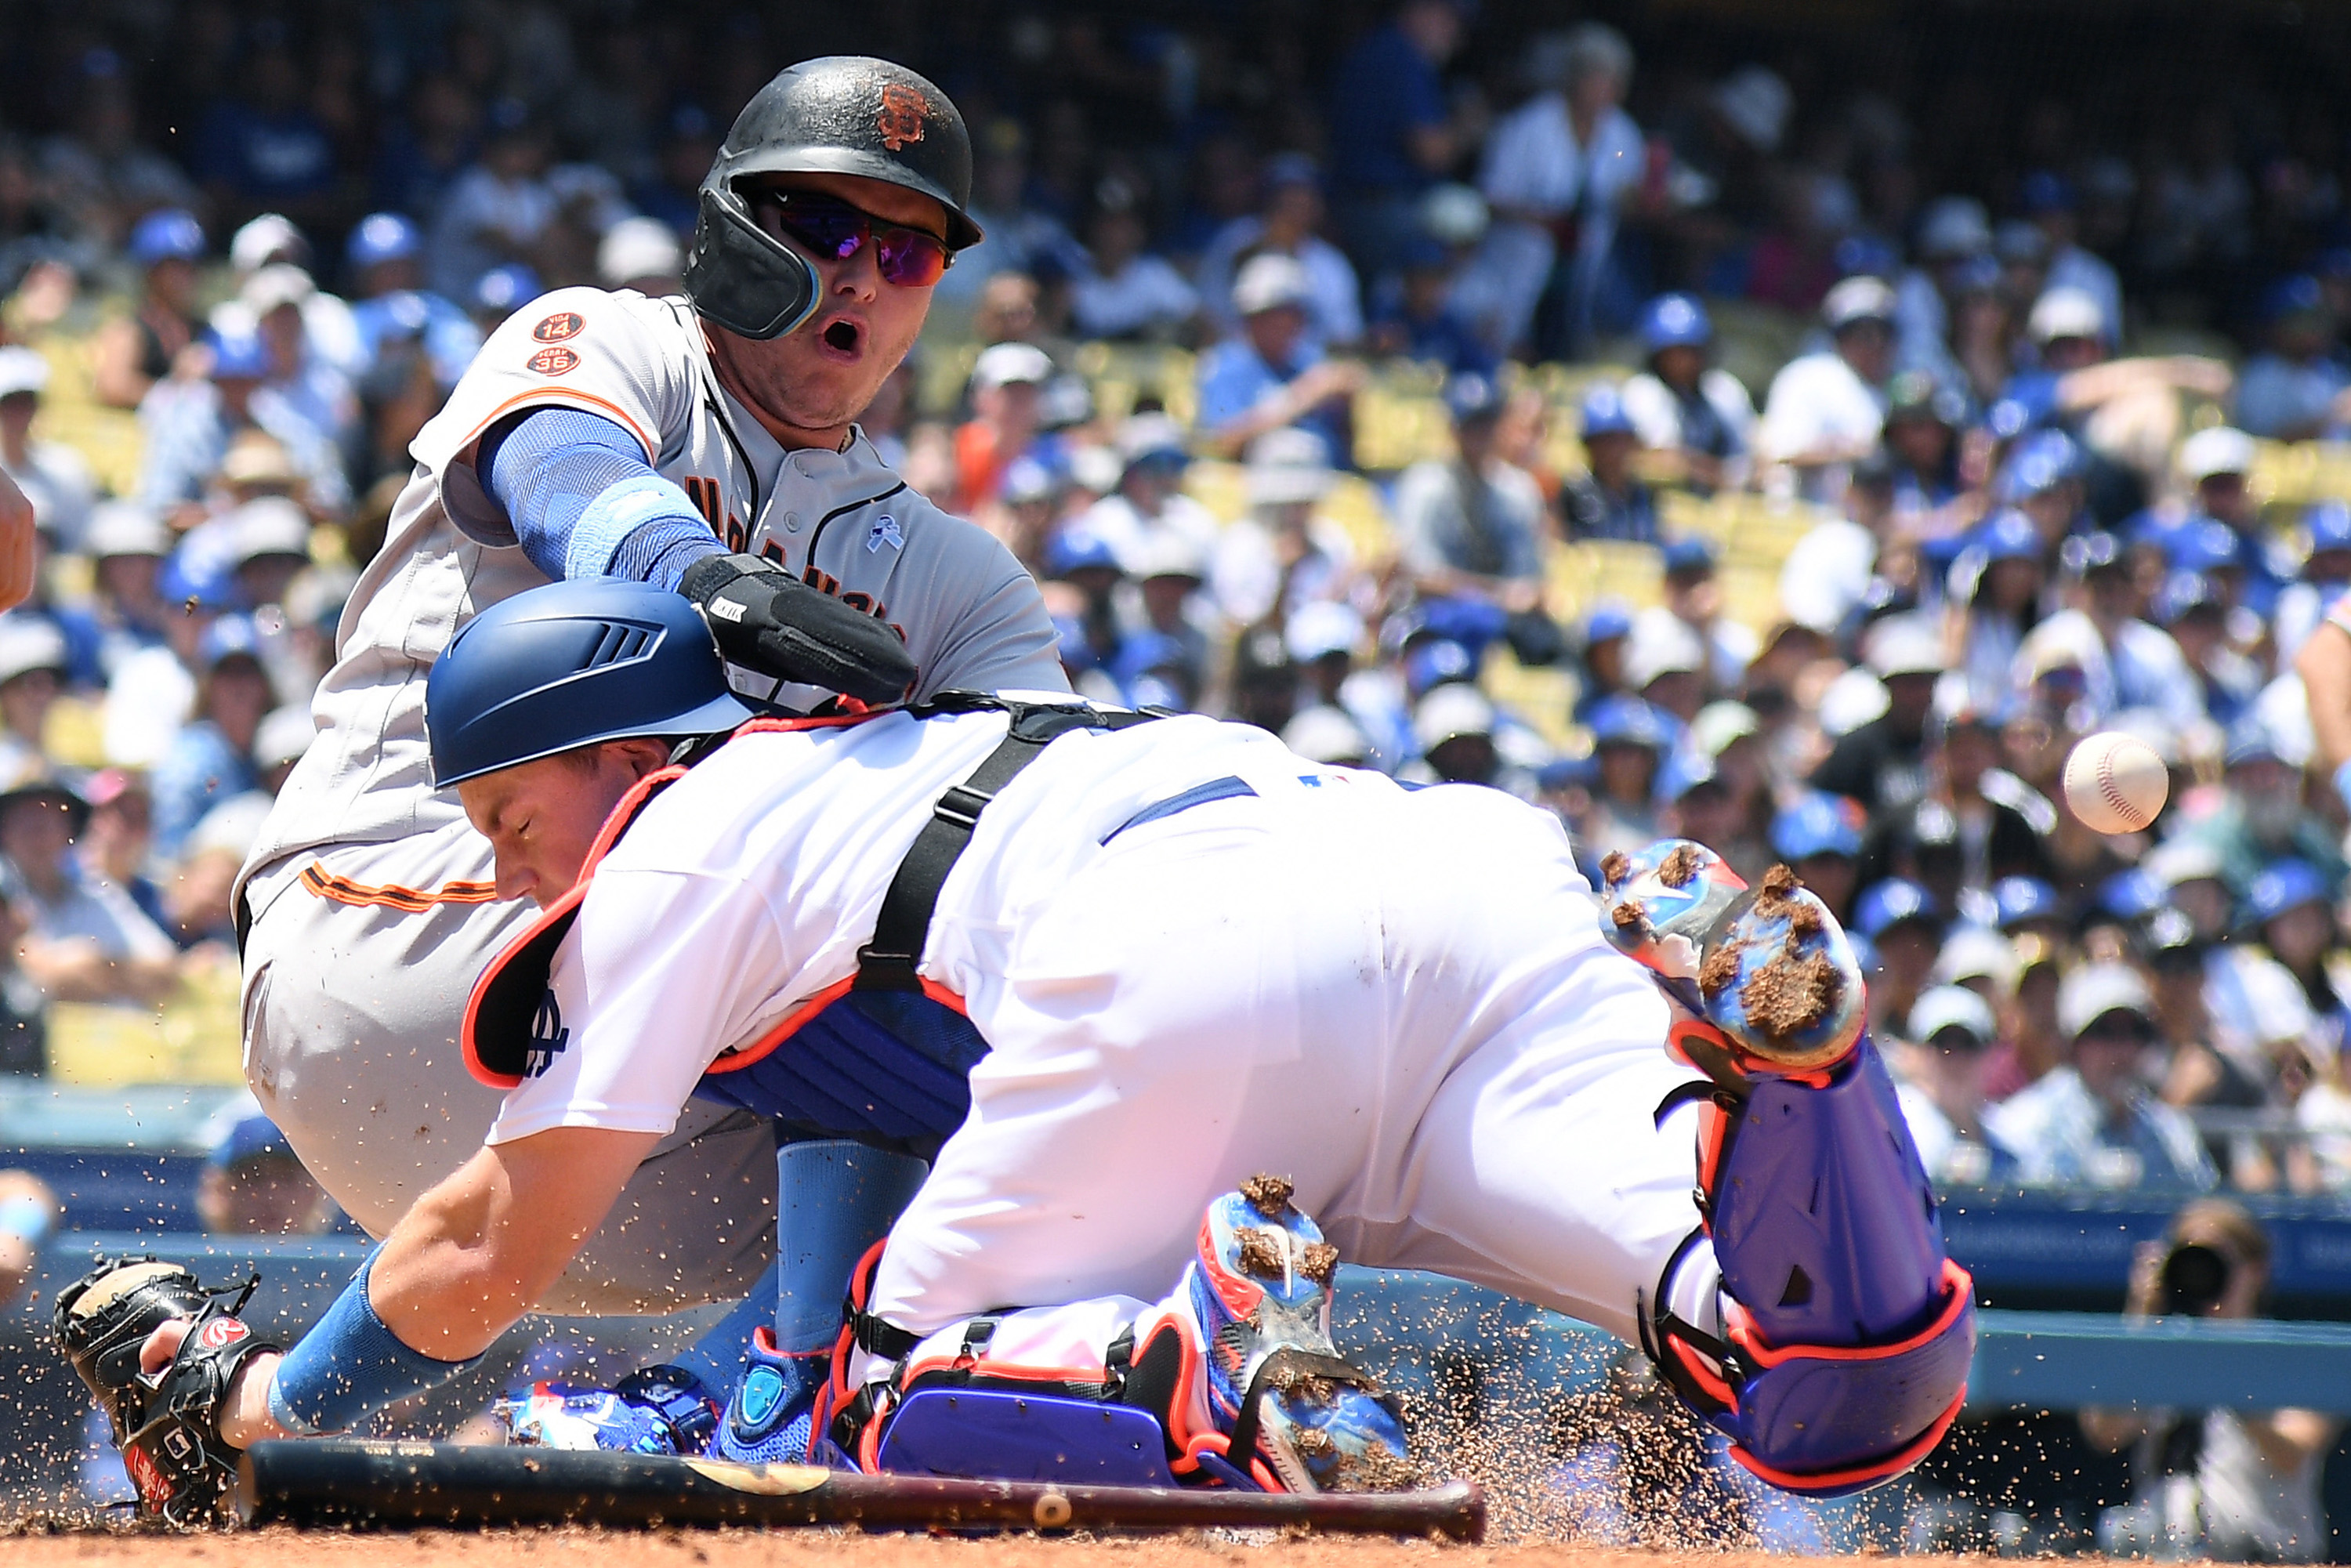 Giants sweep Dodgers for seventh straight win